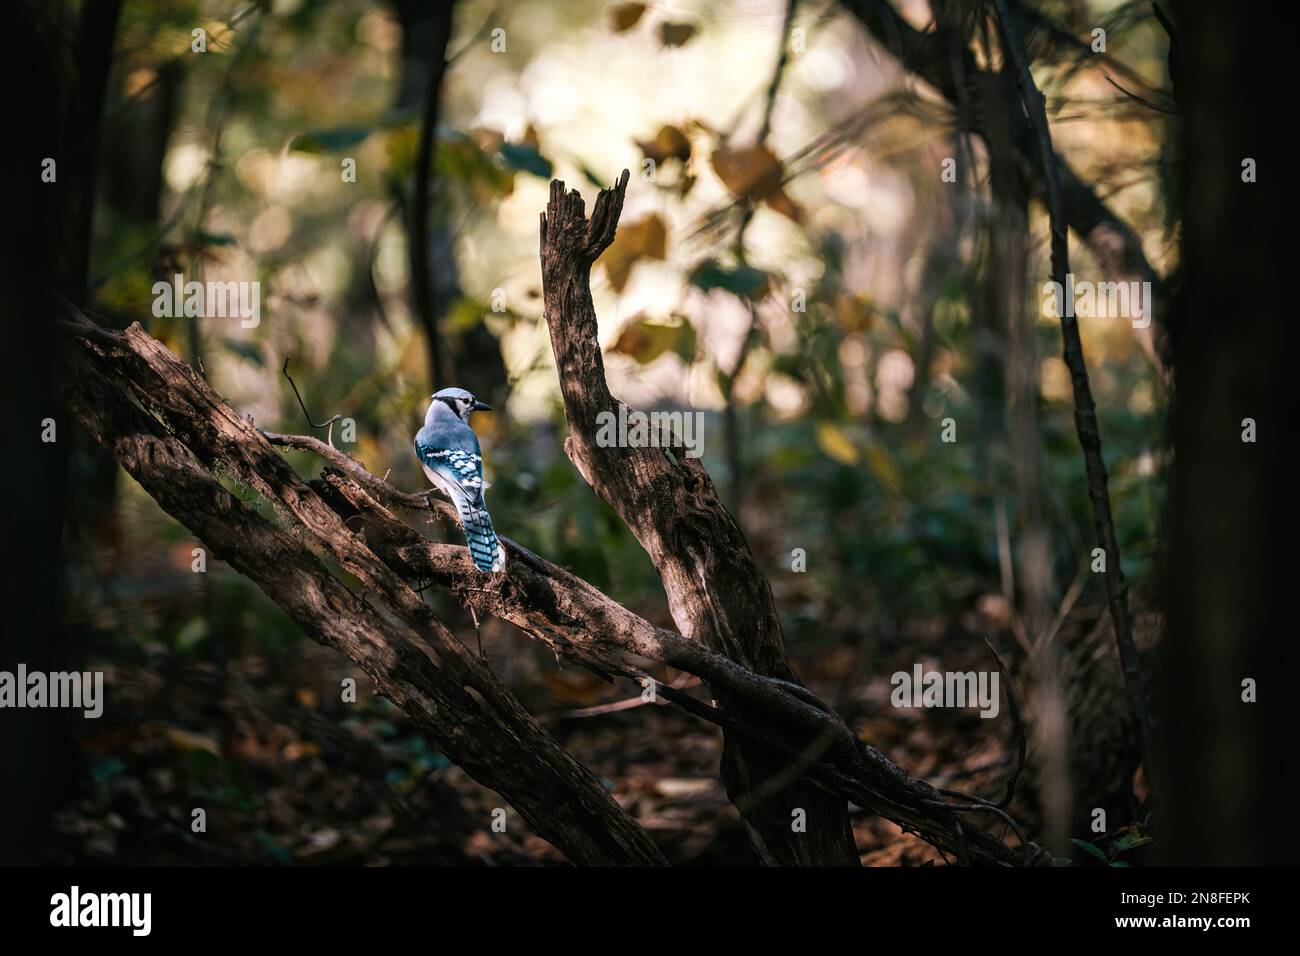 A closeup view of a blue jay in a park Stock Photo